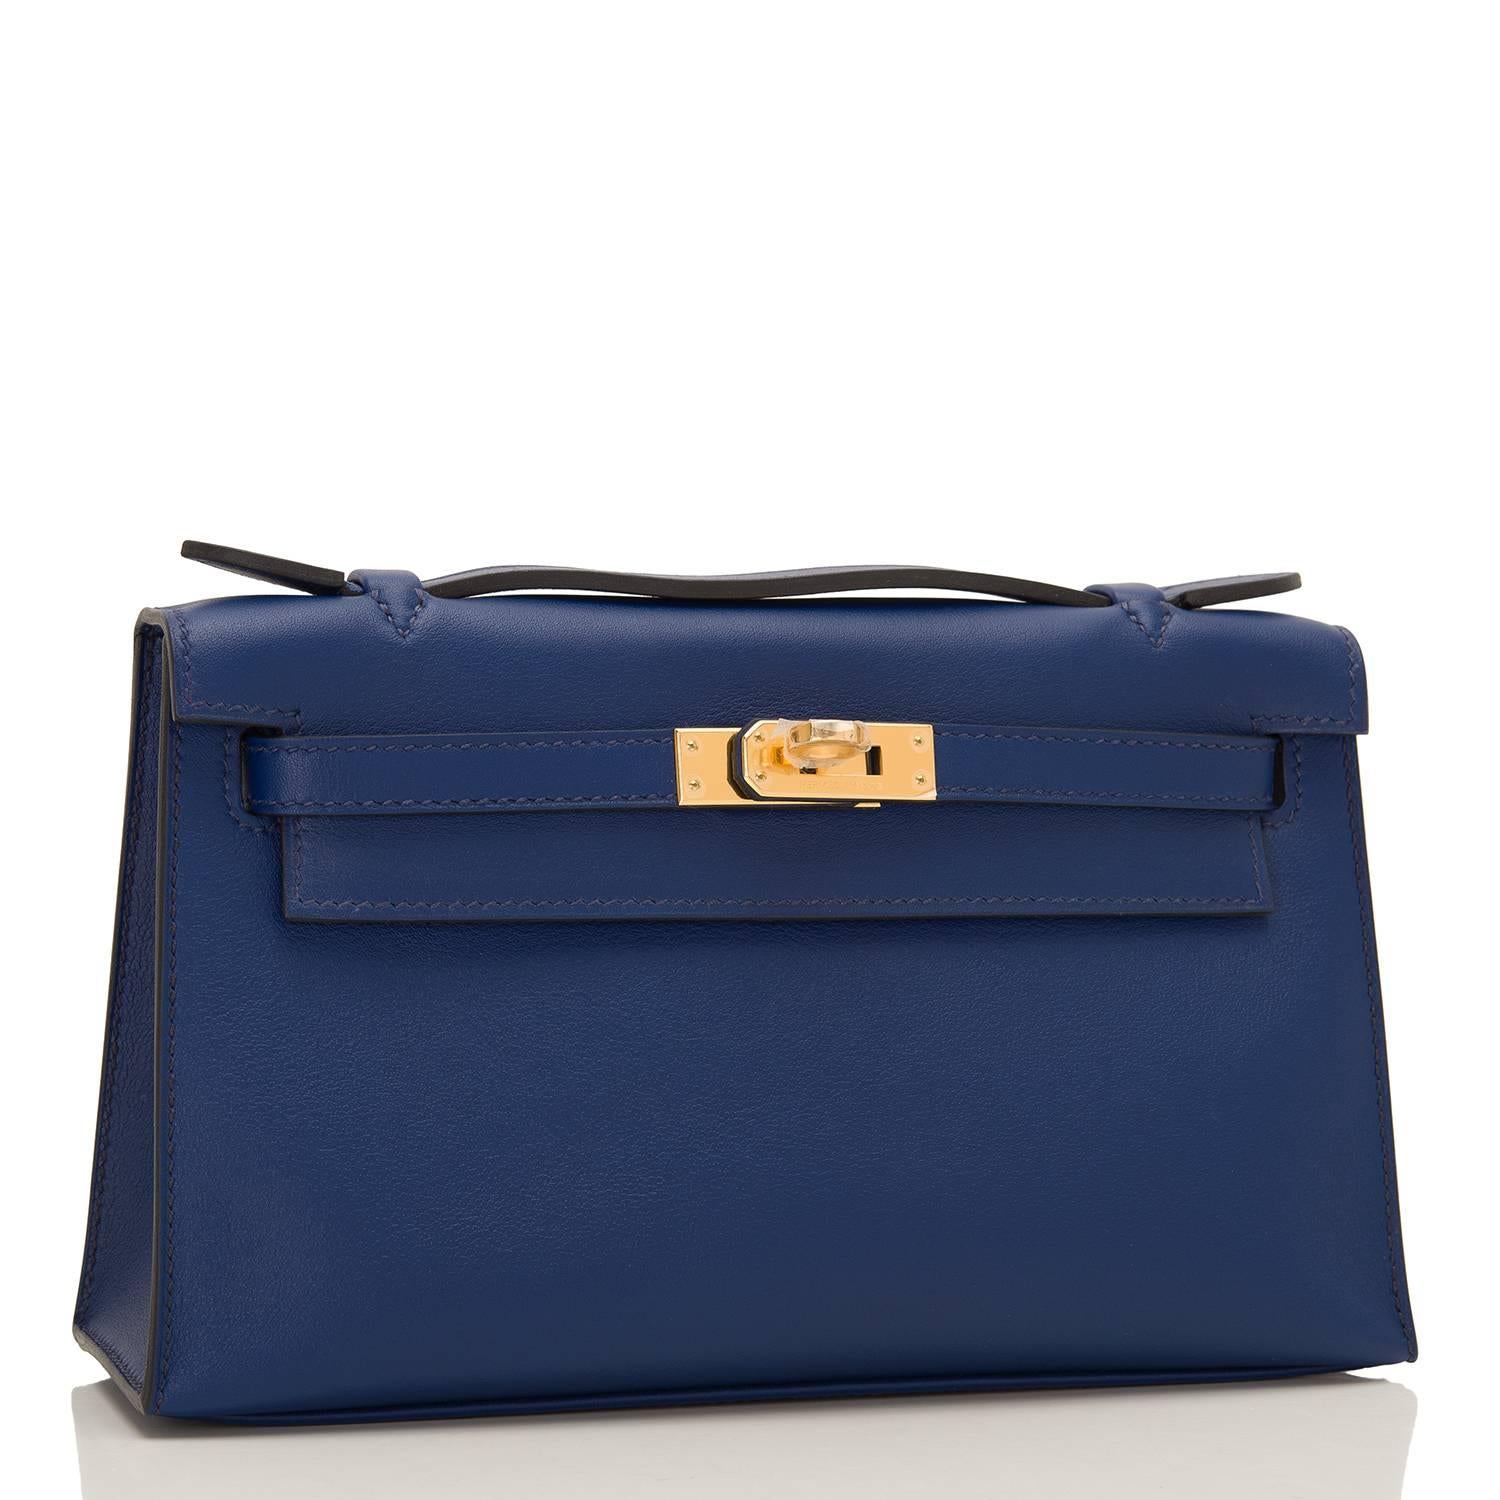 Hermes Blue Sapphire Mini Kelly Pochette of epsom leather with gold hardware.

This Hermes Kelly Pochette has tonal stitching, a front flap with two straps, a toggle closure and a single flat handle.

The interior is lined with Blue Sapphire